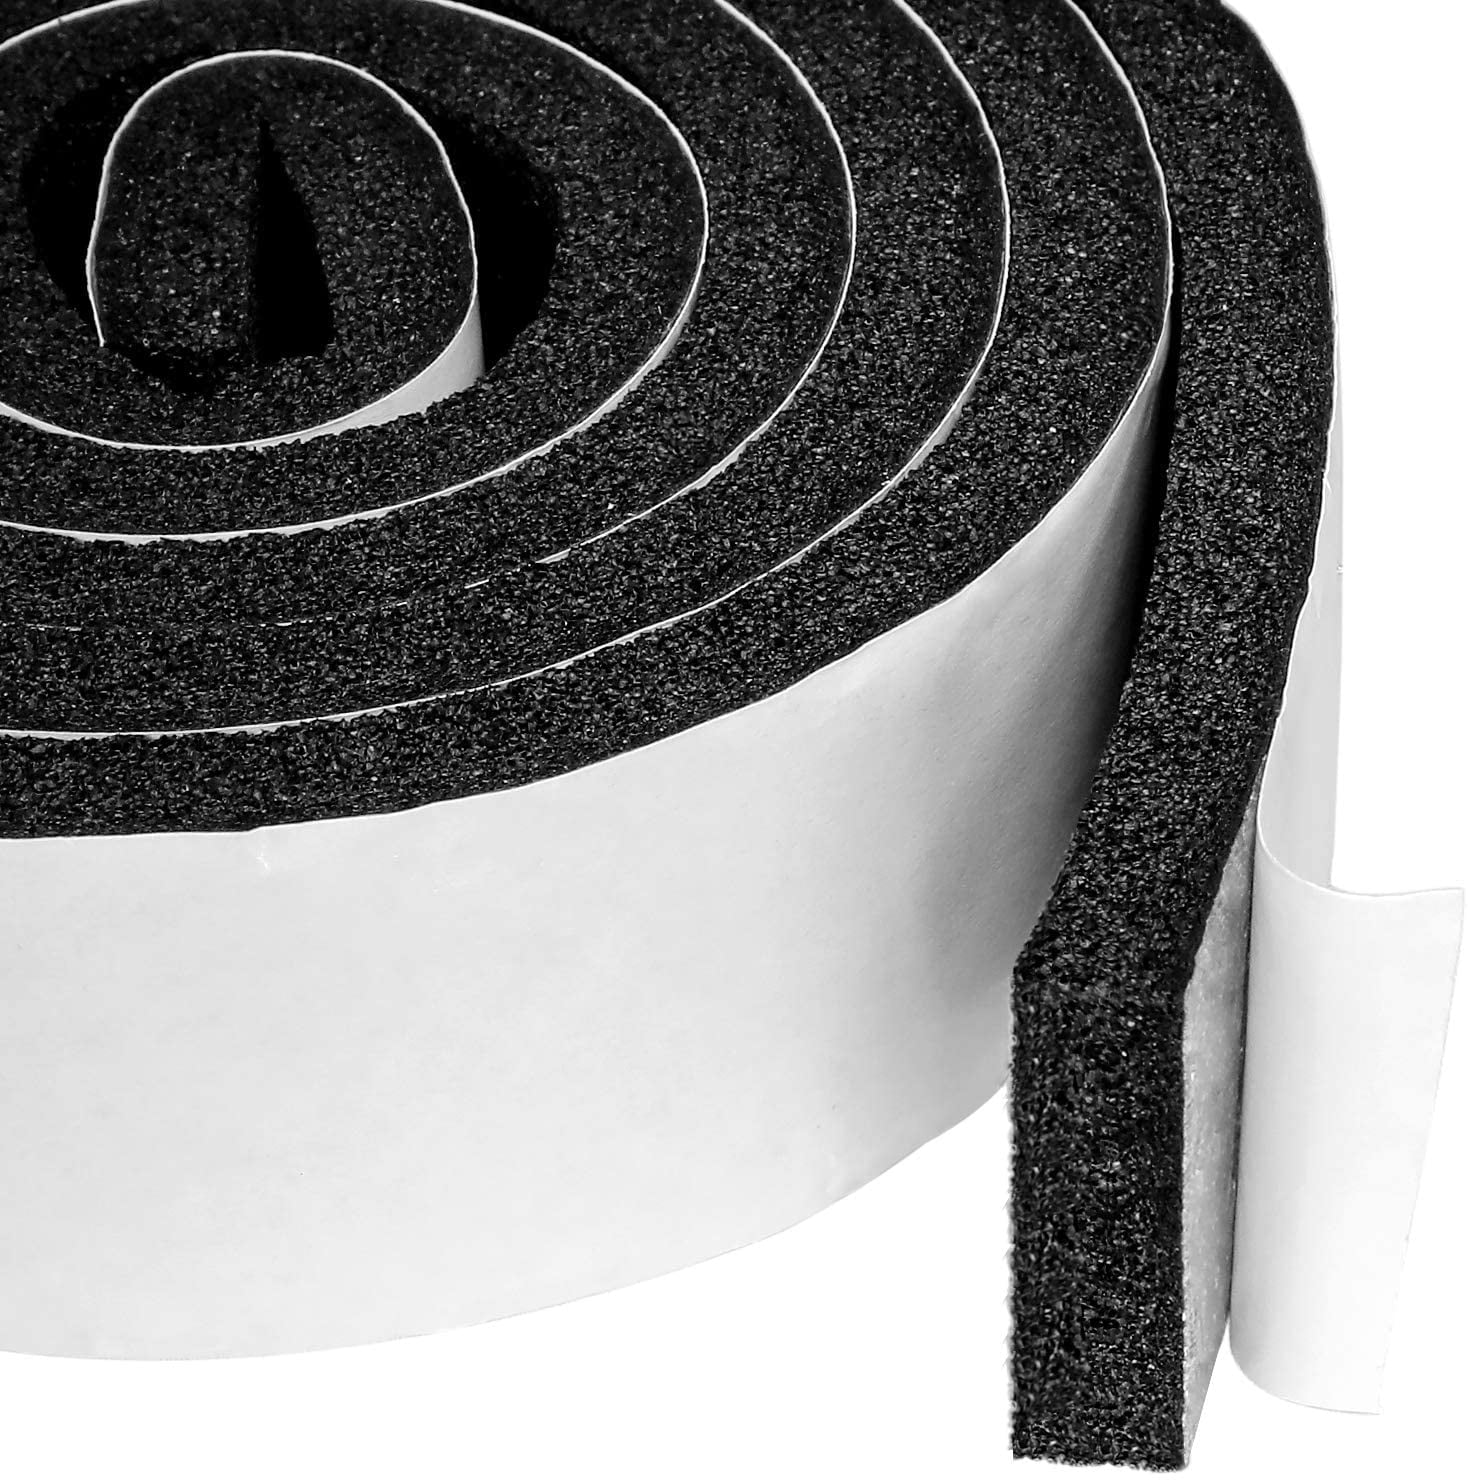 High Density Neoprene Rubber Foam weather strips with Adhesive Total 13 Ft Length, 2 Rolls of 6.5 Ft Each Foam Seal Tape 1 inch W x 3/4 inch T 